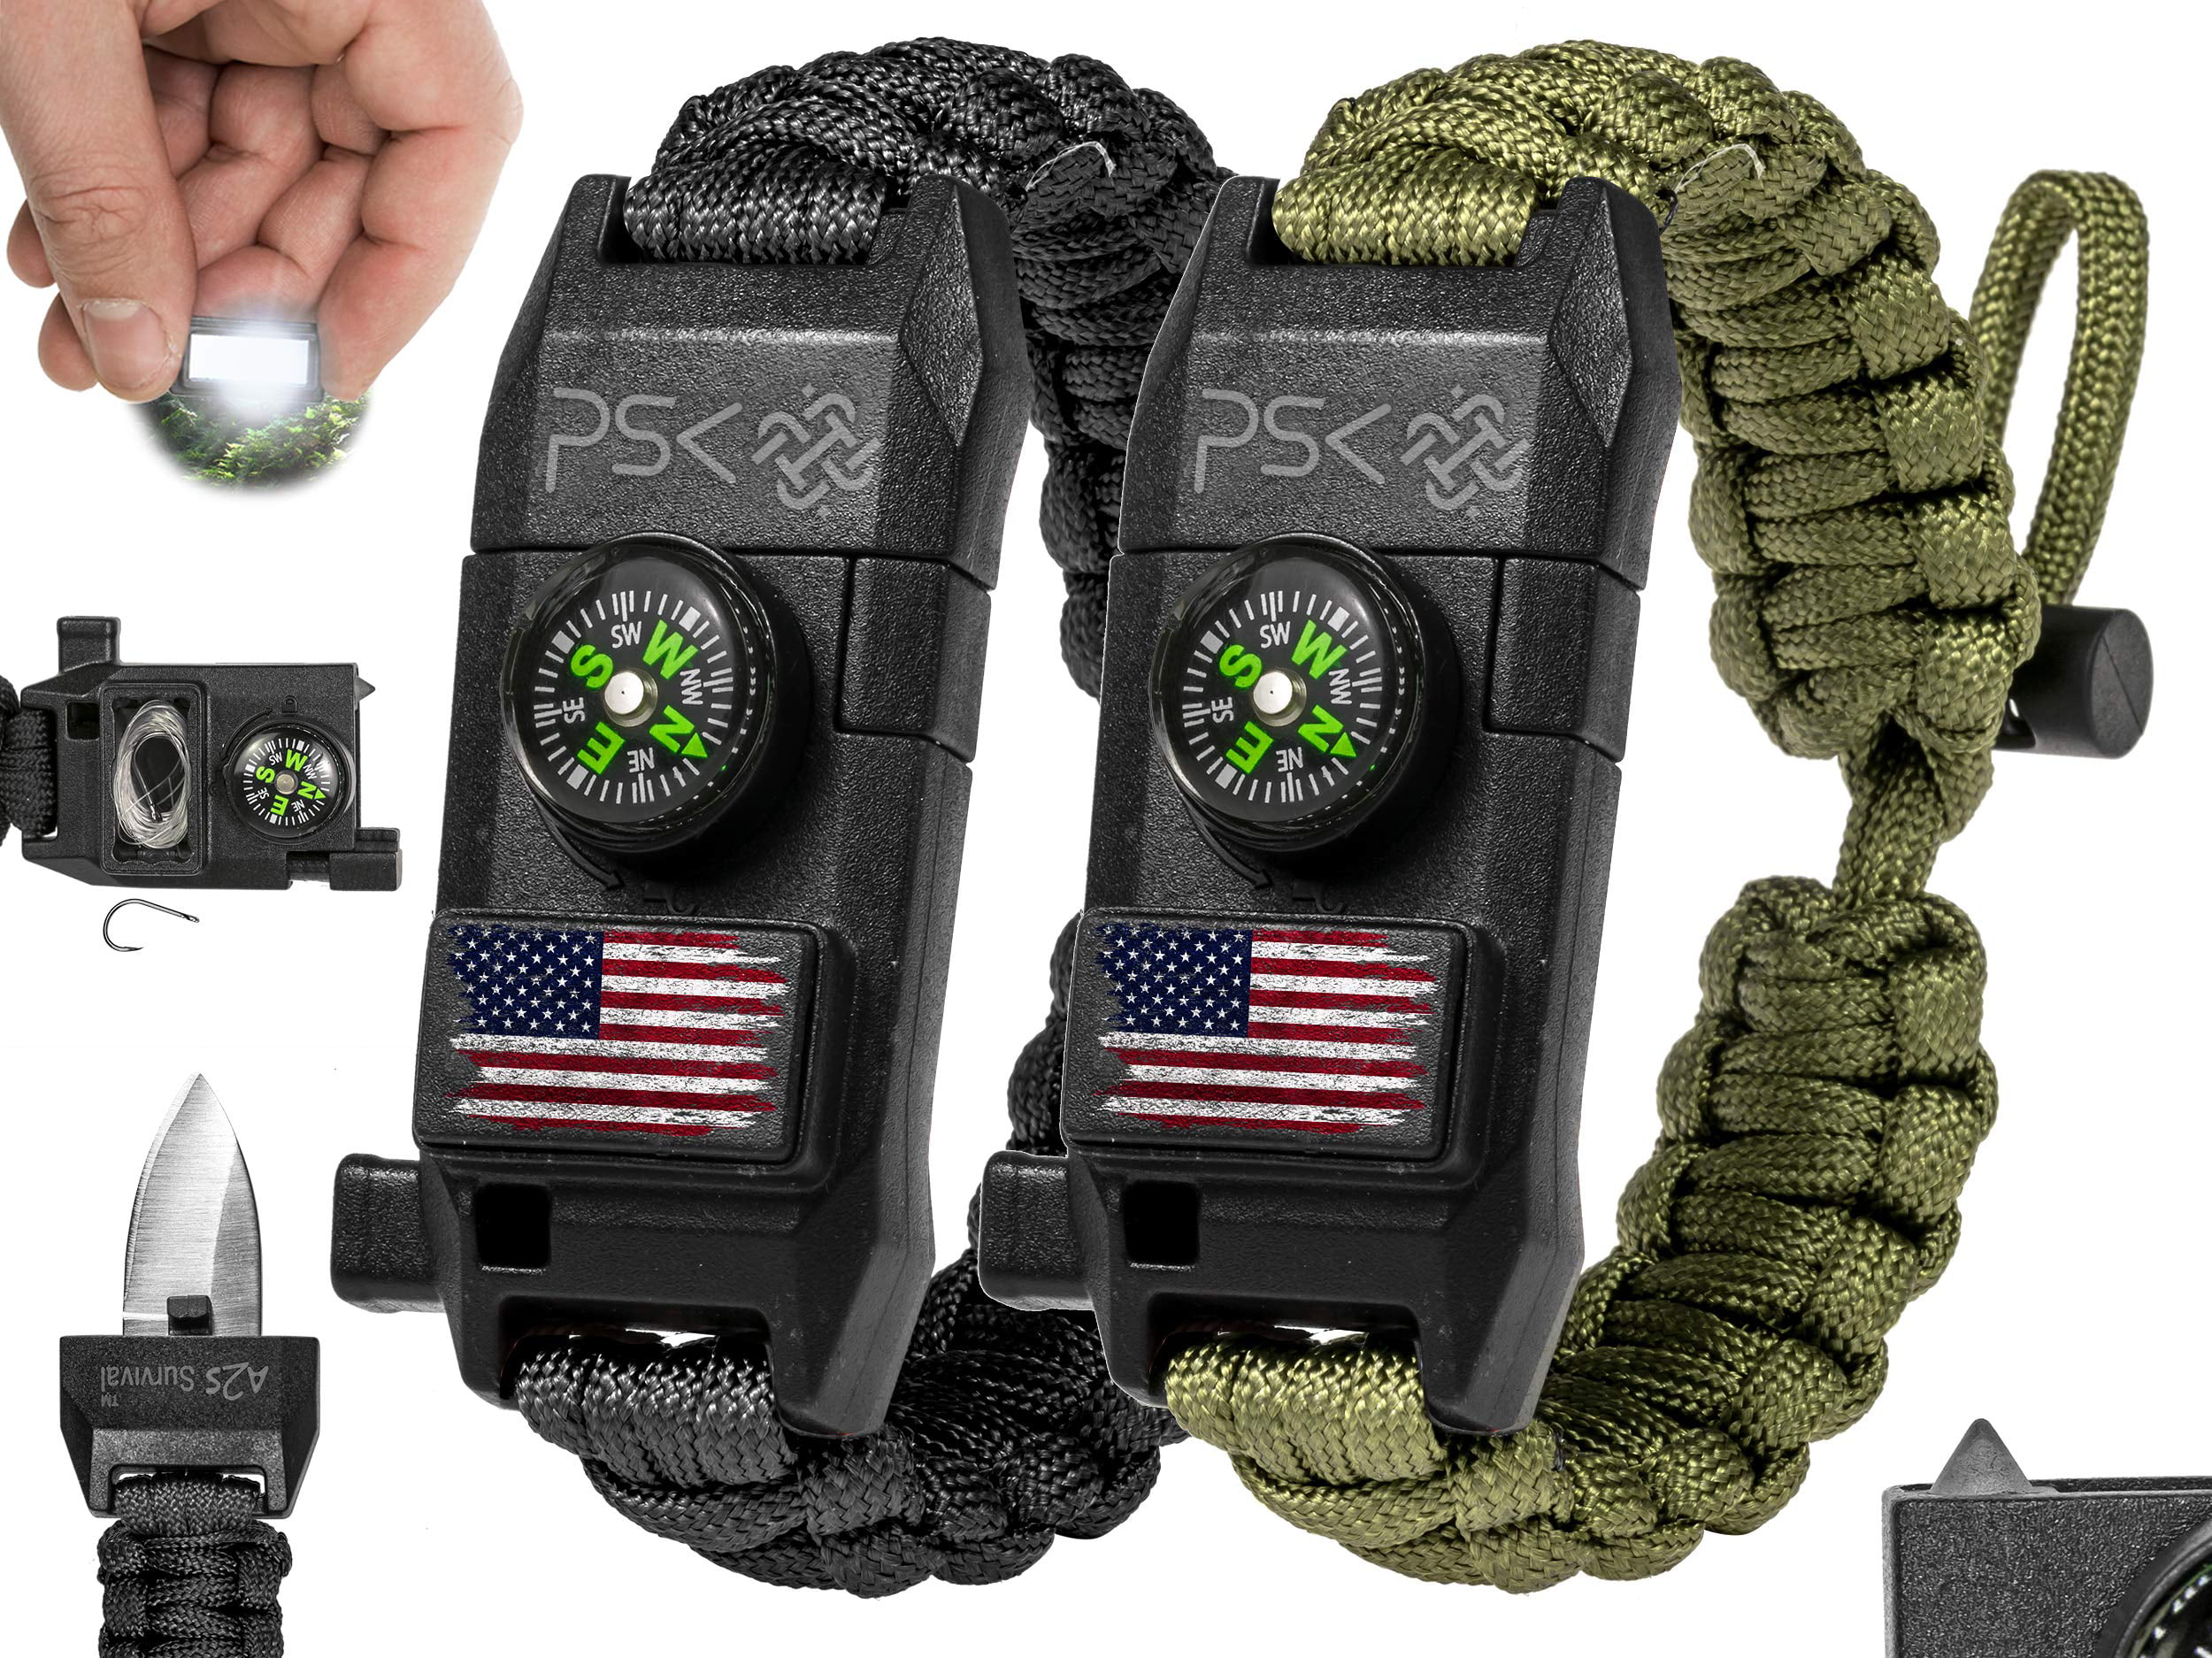 NEW Paracord survival bracelet with whistle fire starter 25 units SALE knife 